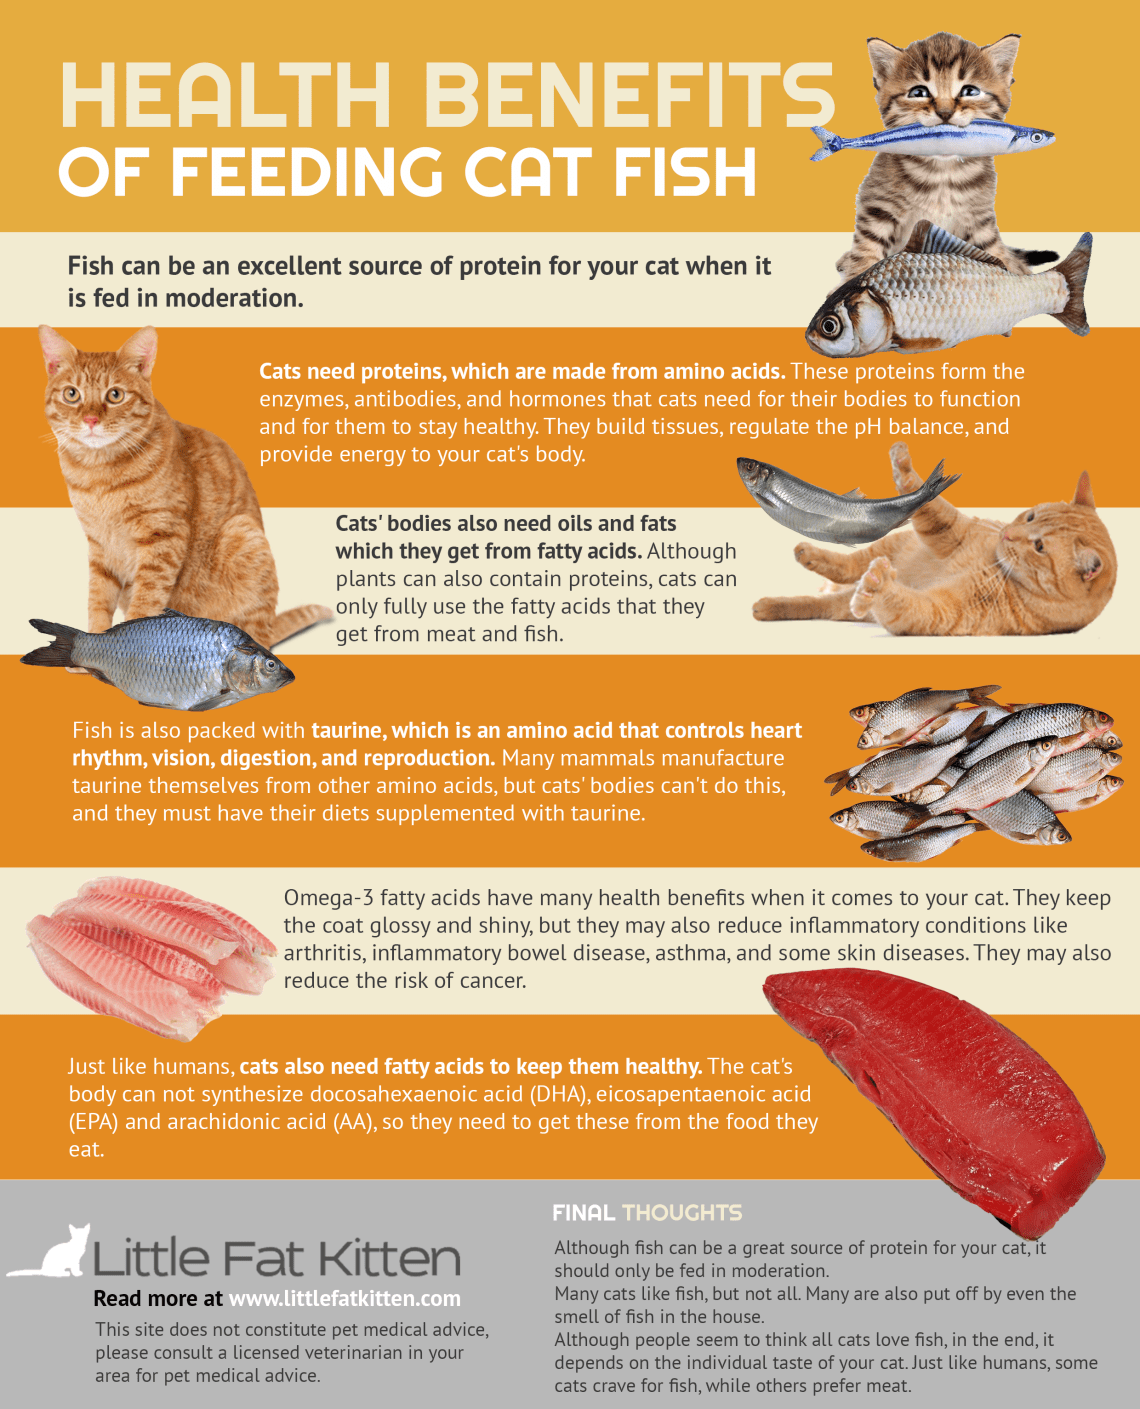 Feed your cat fish to keep her healthy